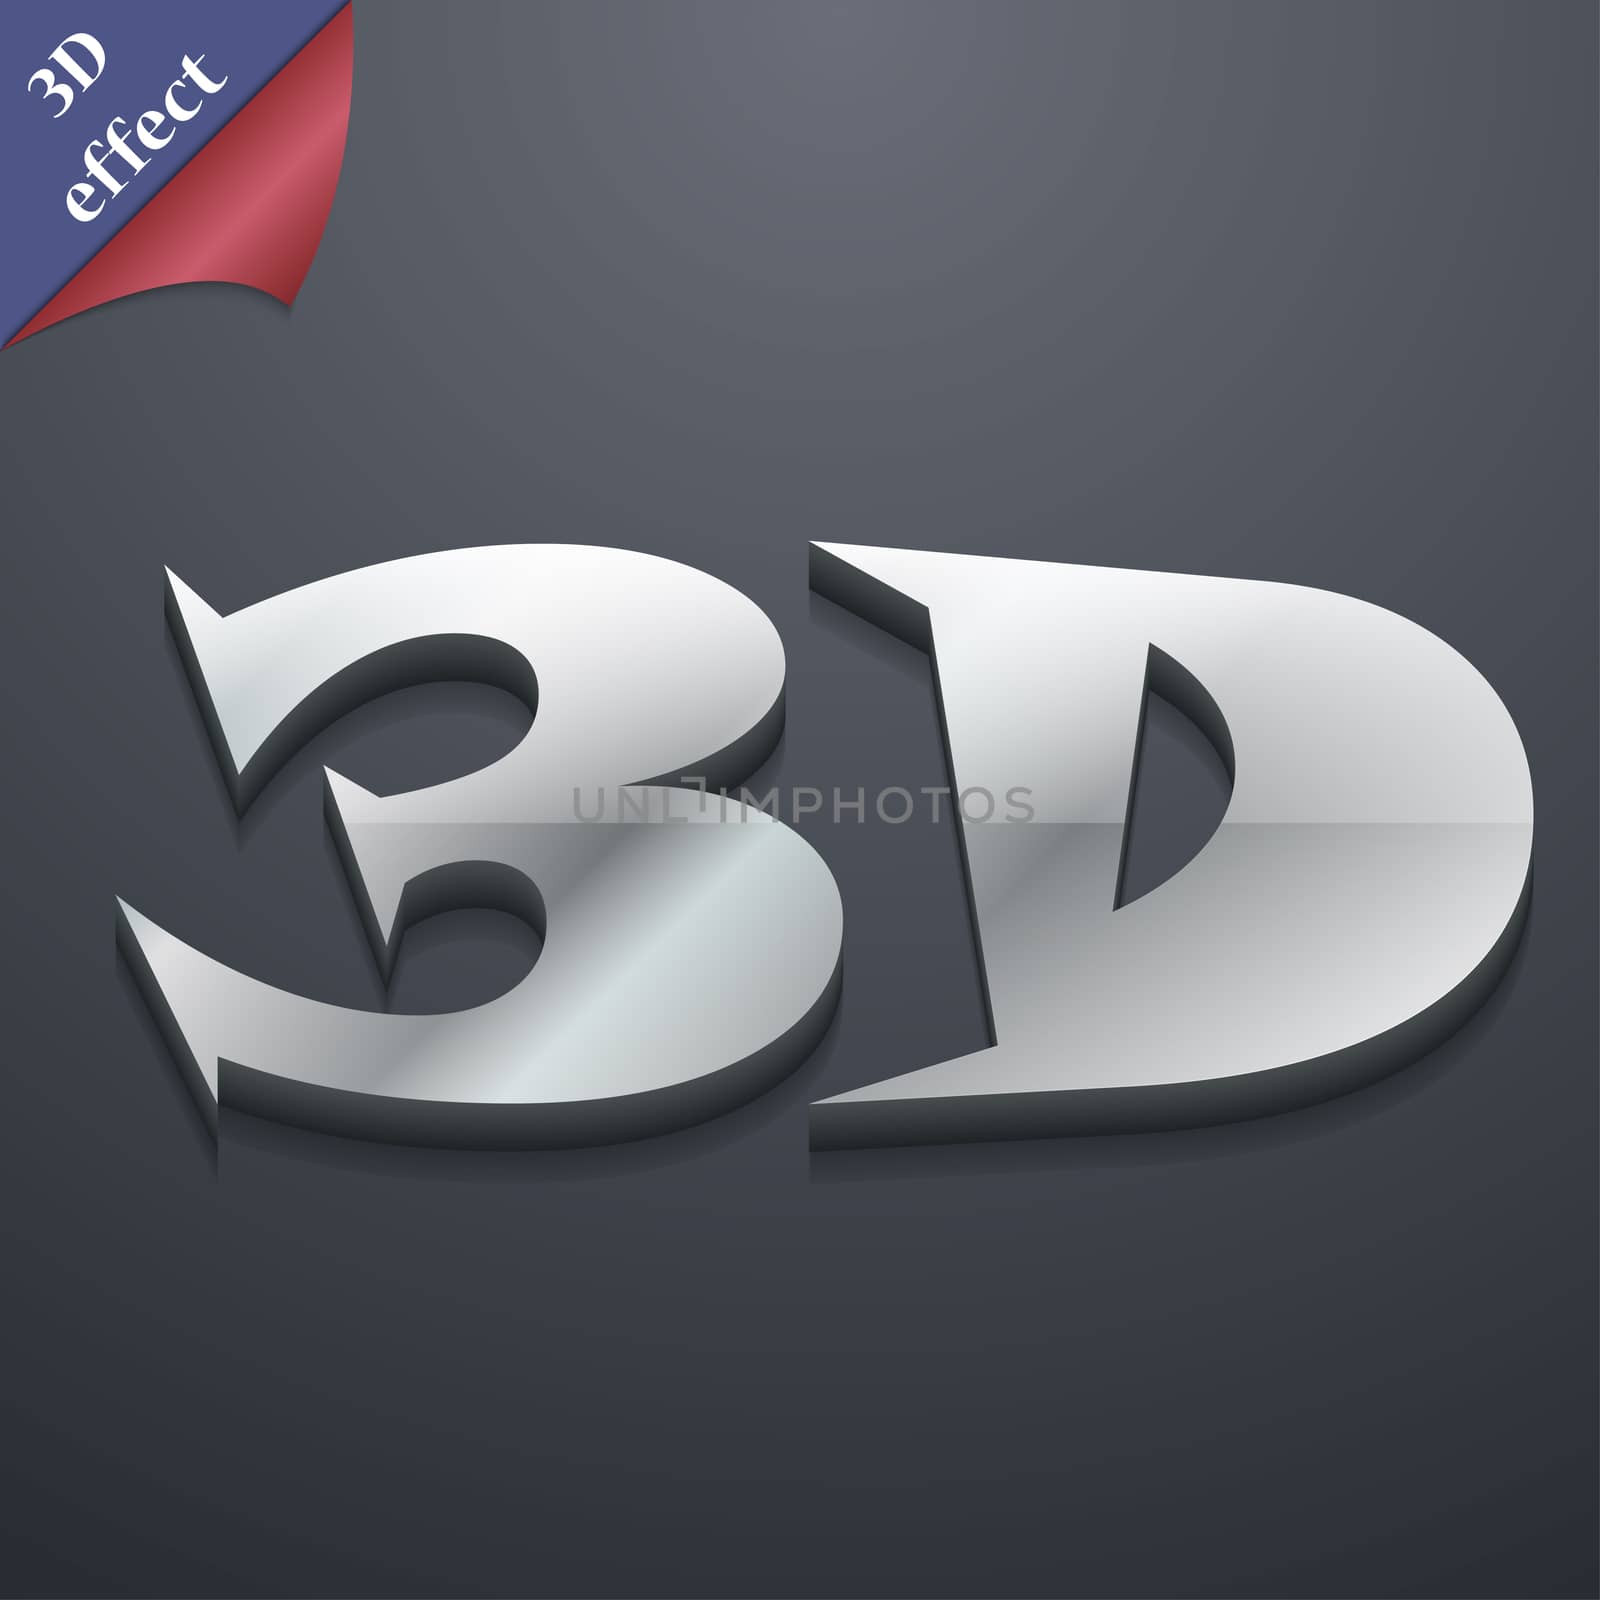 3D icon symbol. 3D-style. Trendy, modern design with space for your text . Rastrized by serhii_lohvyniuk